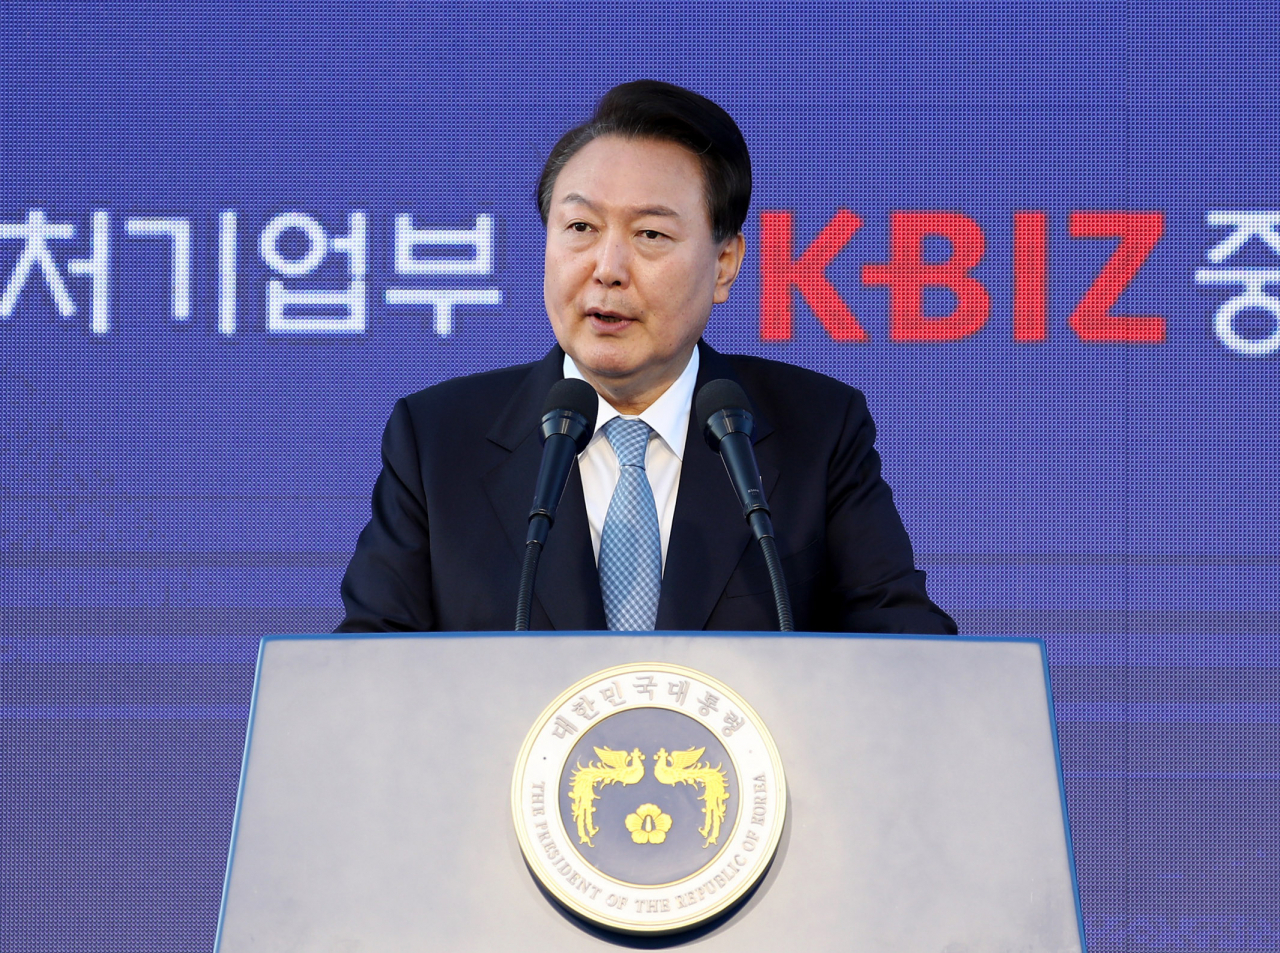 President Yoon Suk Yeol speaks during an event at the presidential office in Seoul on Tuesday. (Joint Press Corps)